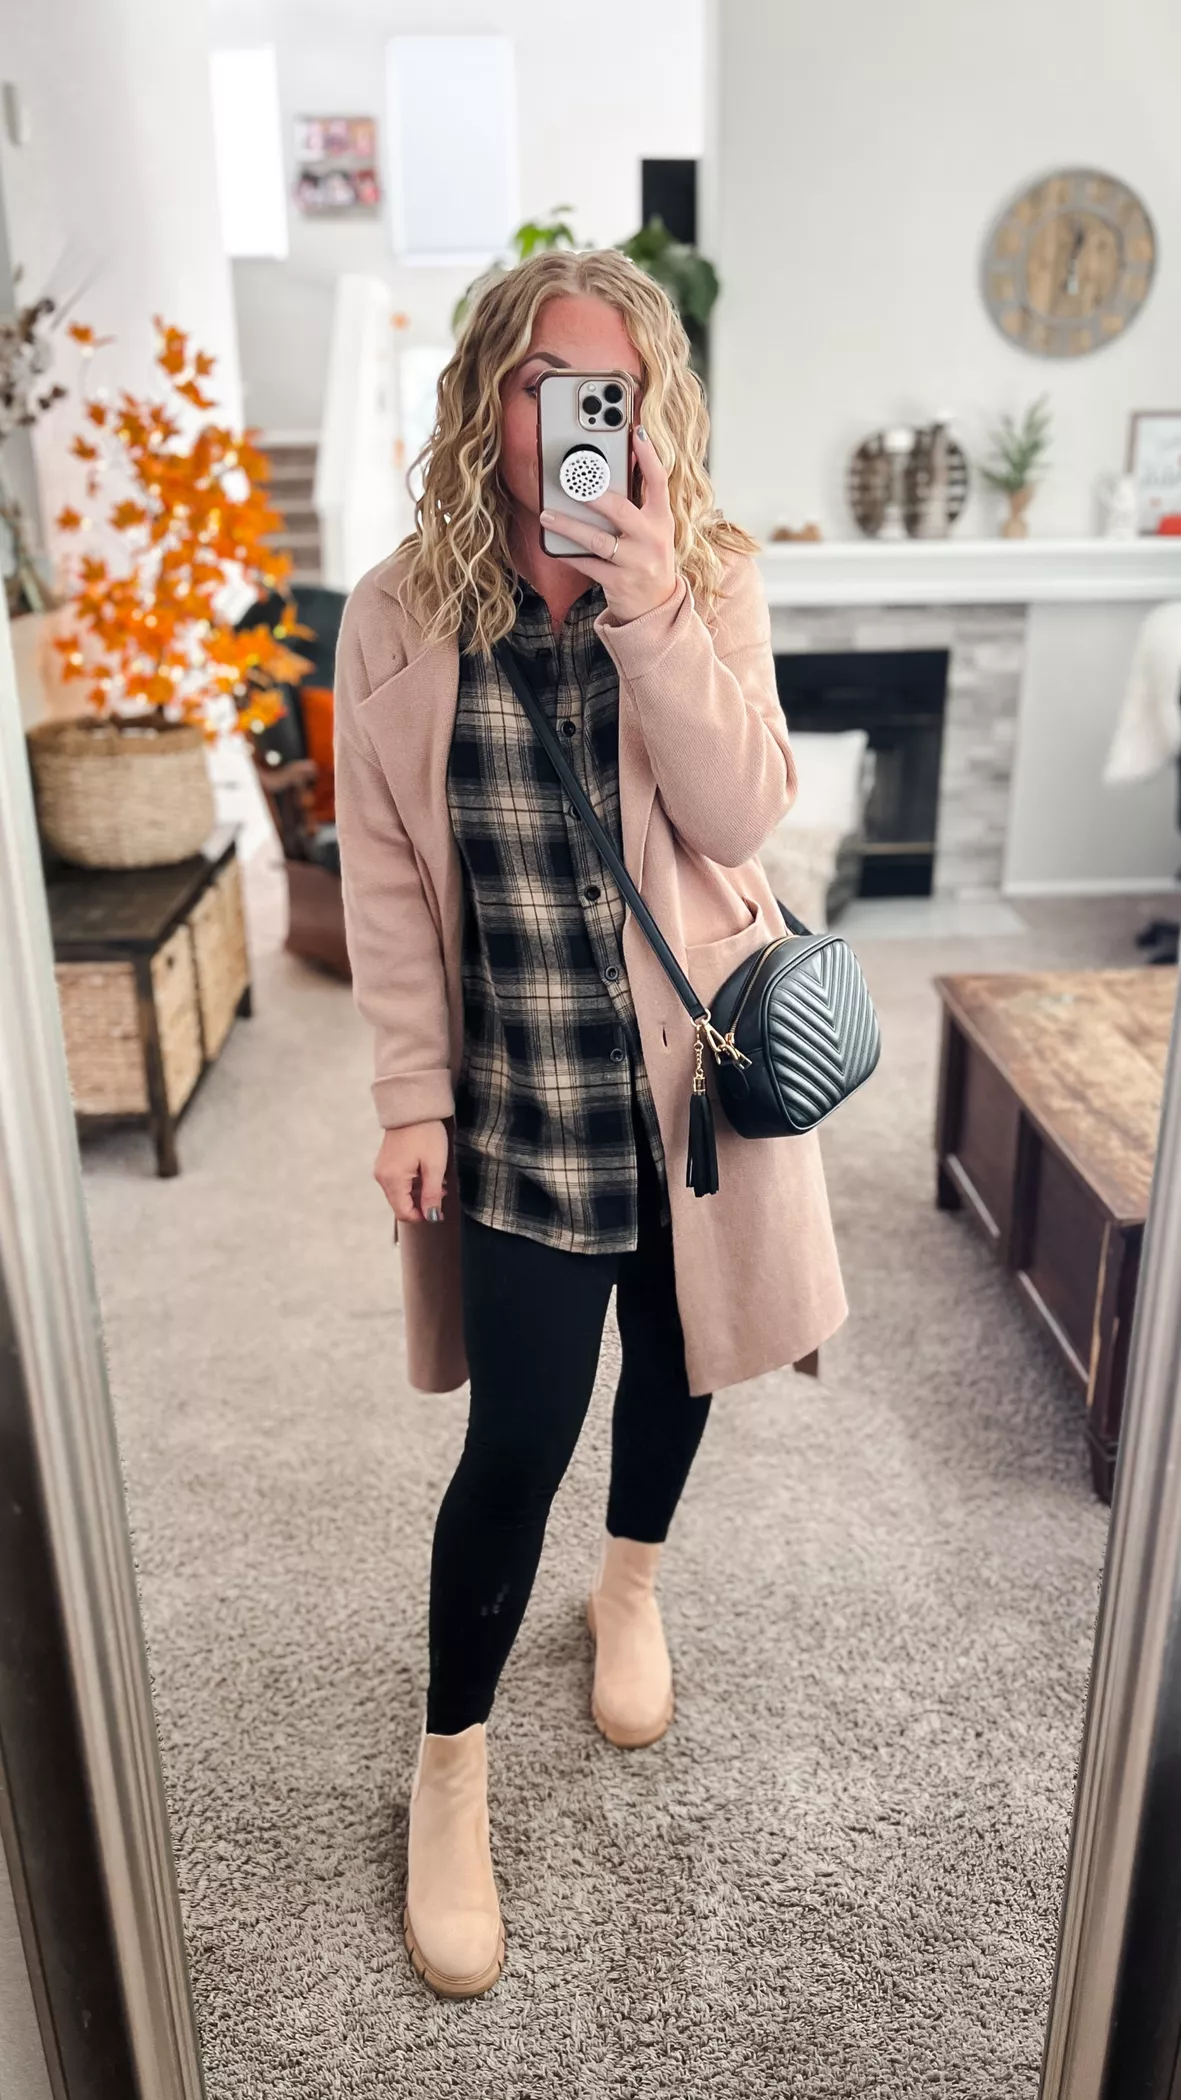 How do you style your Everyday Dress during the fall? 🍂 If you